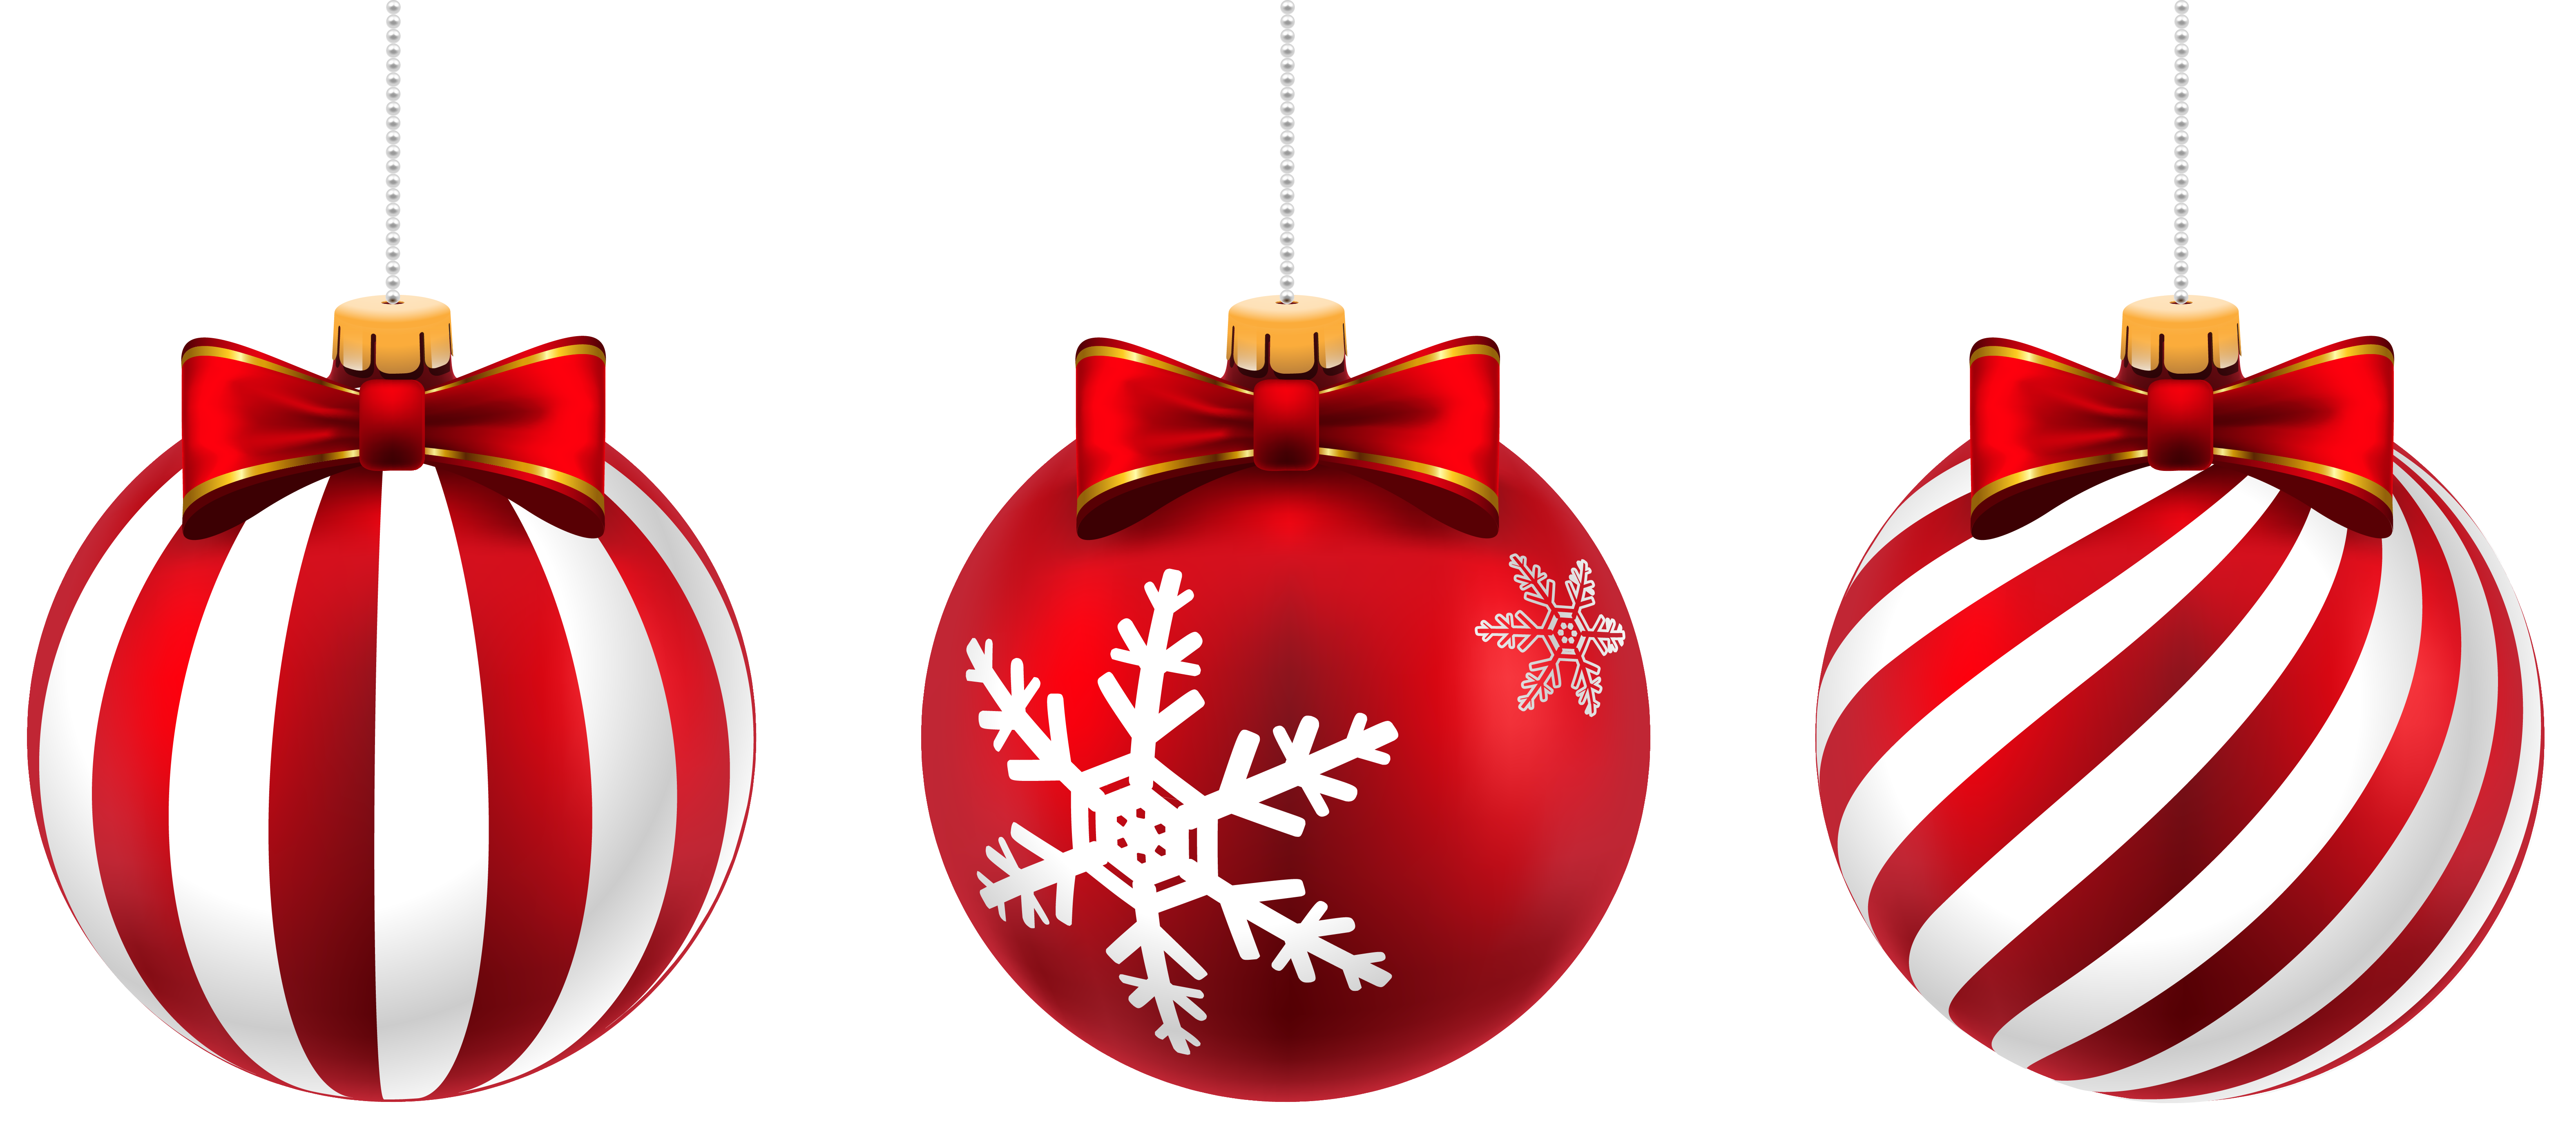 Beautiful Christmas Balls PNG Clip-Art Image | Gallery Yopriceville - High-Quality Images and ...